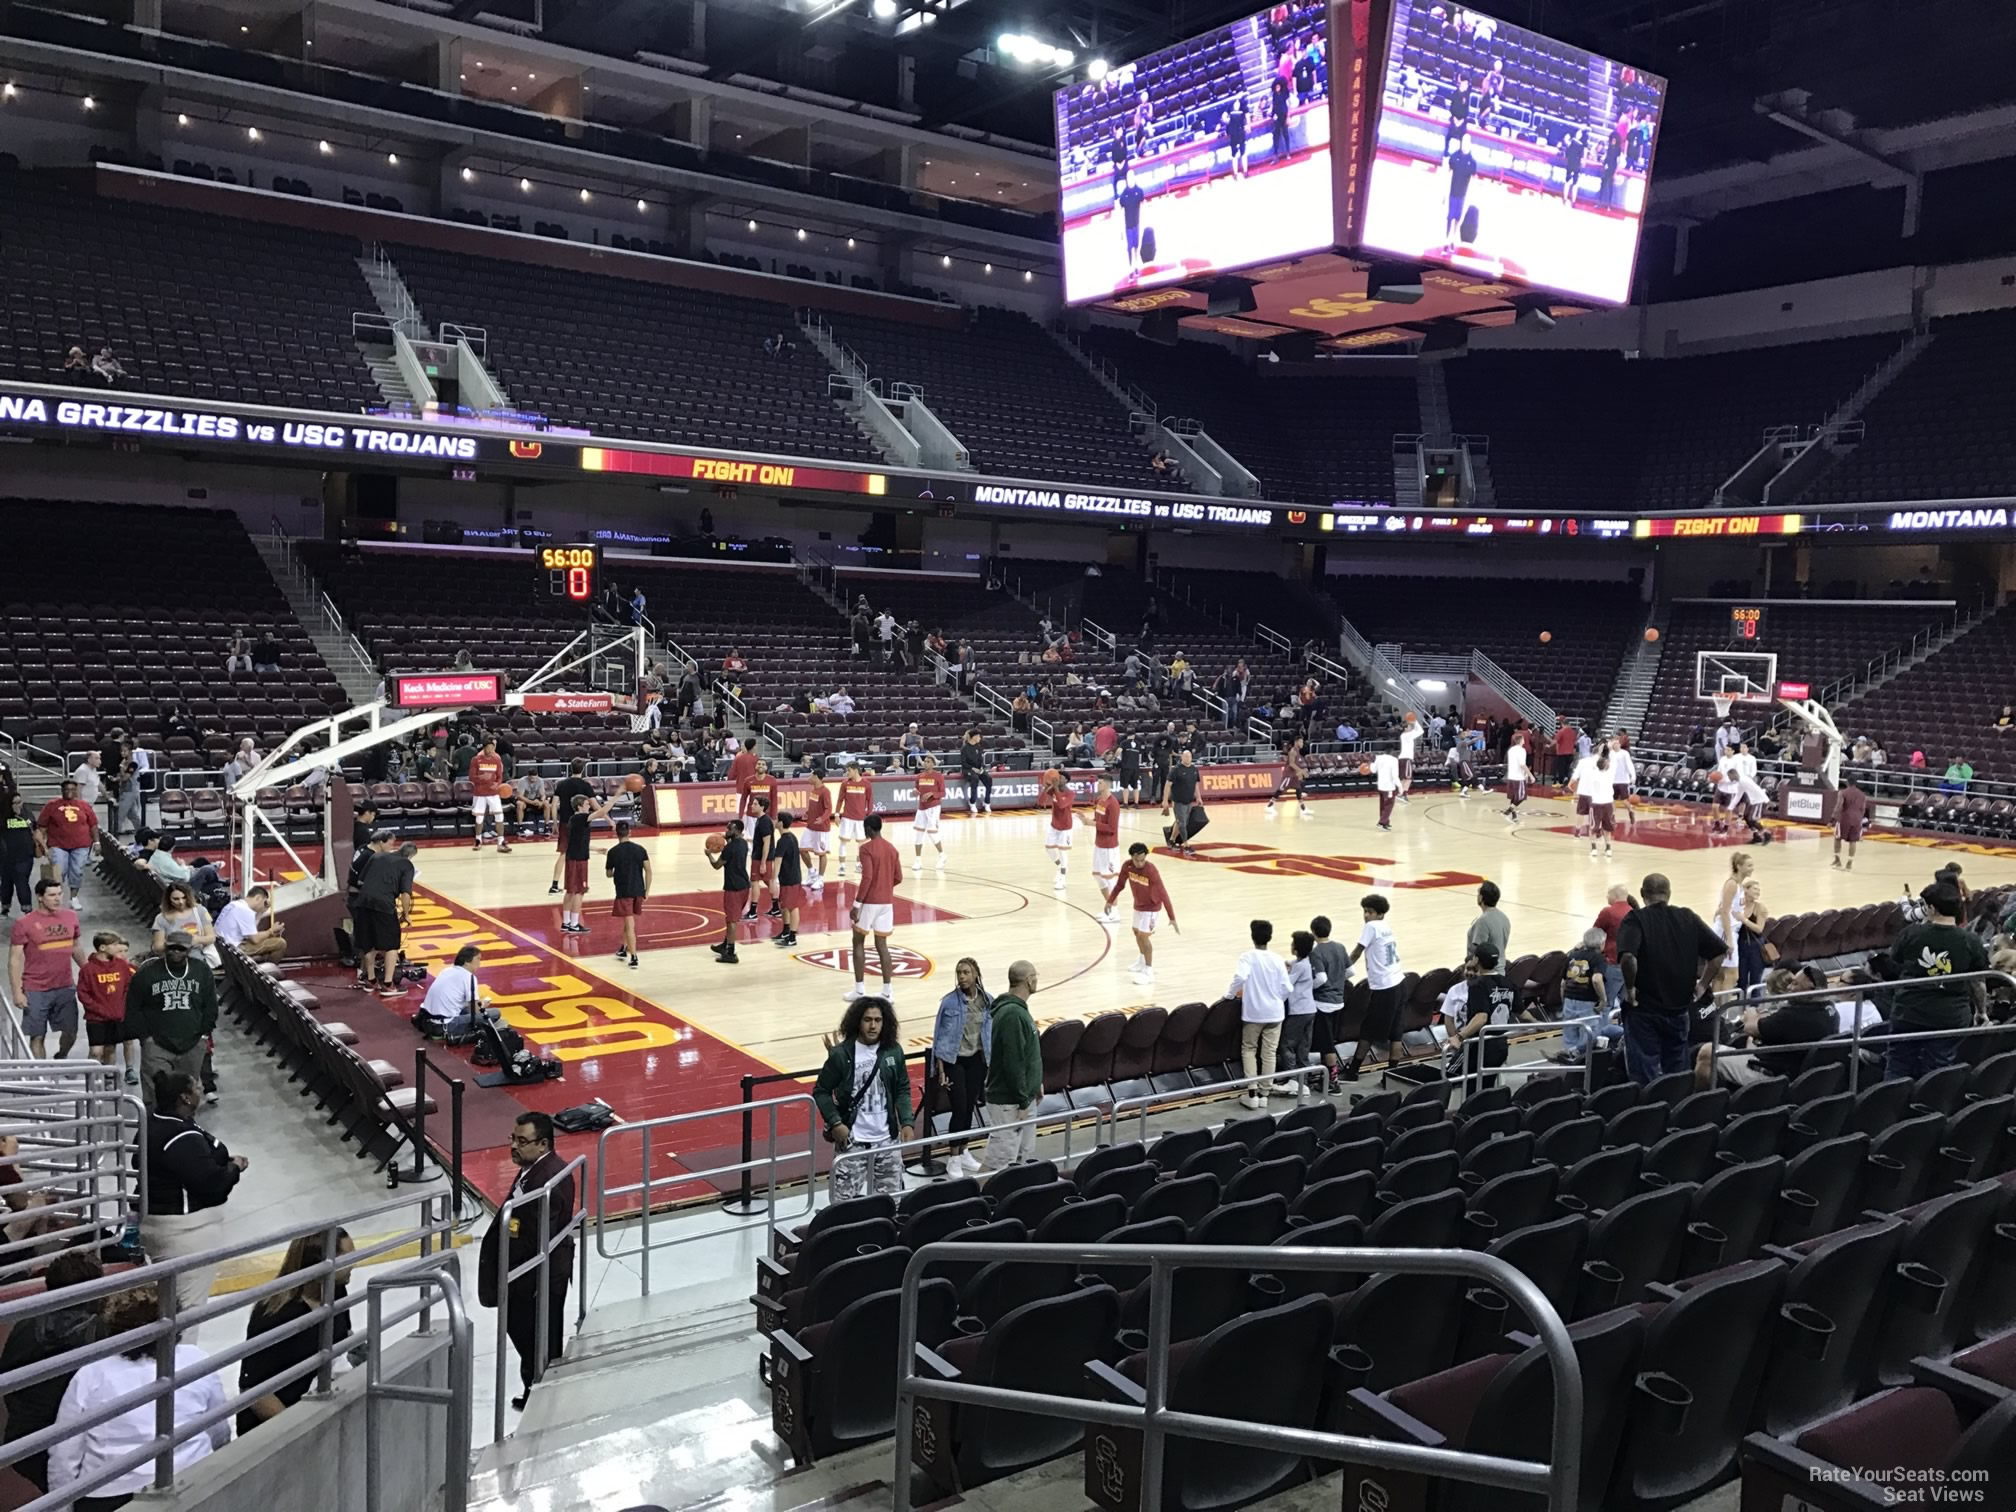 section 101, row 10 seat view  - galen center